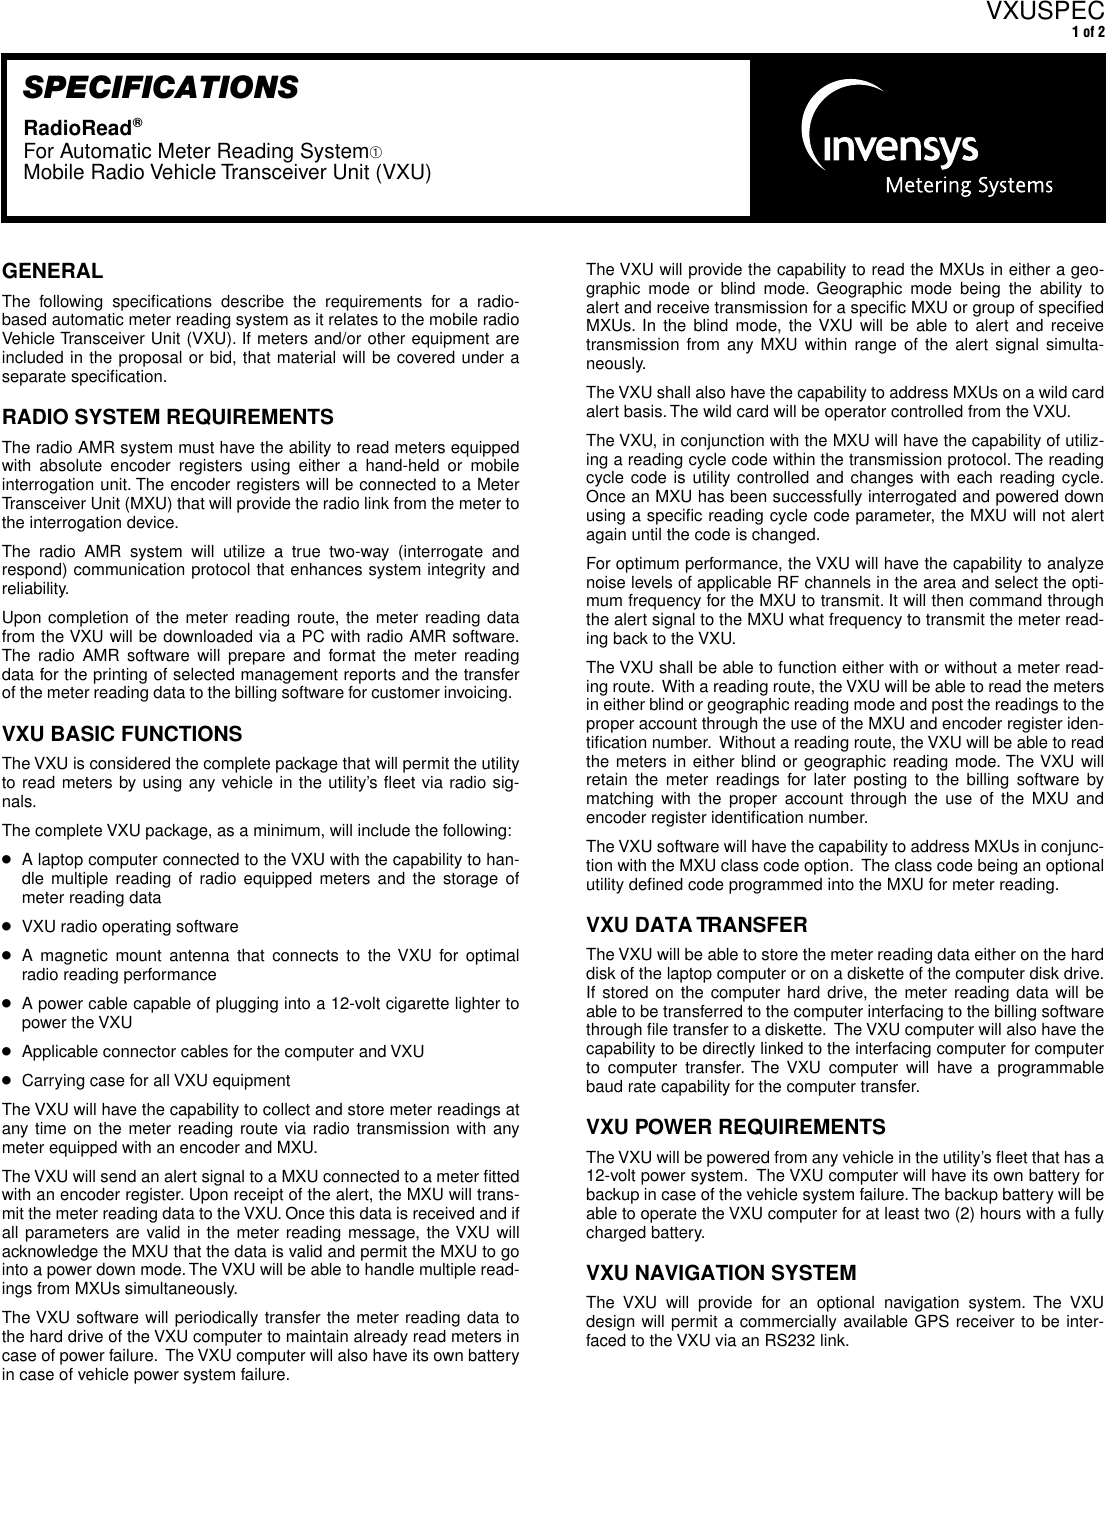  GENERAL The following speciﬁcations describe the requirements for a radio-based automatic meter reading system as it relates to the mobile radioVehicle Transceiver Unit (VXU). If meters and/or other equipment areincluded in the proposal or bid, that material will be covered under aseparate speciﬁcation. RADIO SYSTEM REQUIREMENTS The radio AMR system must have the ability to read meters equippedwith absolute encoder registers using either a hand-held or mobileinterrogation unit. The encoder registers will be connected to a MeterTransceiver Unit (MXU) that will provide the radio link from the meter tothe interrogation device.The radio AMR system will utilize a true two-way (interrogate andrespond) communication protocol that enhances system integrity andreliability.  Upon completion of the meter reading route, the meter reading datafrom the VXU will be downloaded via a PC with radio AMR software.The radio AMR software will prepare and format the meter readingdata for the printing of selected management reports and the transferof the meter reading data to the billing software for customer invoicing.   VXU BASIC FUNCTIONS The VXU is considered the complete package that will permit the utilityto read meters by using any vehicle in the utility’s ﬂeet via radio sig-nals. The complete VXU package, as a minimum, will include the following: ● A laptop computer connected to the VXU with the capability to han-dle multiple reading of radio equipped meters and the storage ofmeter reading data ● VXU radio operating software  ● A magnetic mount antenna that connects to the VXU for optimalradio reading performance ● A power cable capable of plugging into a 12-volt cigarette lighter topower the VXU ● Applicable connector cables for the computer and VXU ● Carrying case for all VXU equipmentThe VXU will have the capability to collect and store meter readings atany time on the meter reading route via radio transmission with anymeter equipped with an encoder and MXU.The VXU will send an alert signal to a MXU connected to a meter ﬁttedwith an encoder register. Upon receipt of the alert, the MXU will trans-mit the meter reading data to the VXU. Once this data is received and ifall parameters are valid in the meter reading message, the VXU willacknowledge the MXU that the data is valid and permit the MXU to gointo a power down mode. The VXU will be able to handle multiple read-ings from MXUs simultaneously. The VXU software will periodically transfer the meter reading data tothe hard drive of the VXU computer to maintain already read meters incase of power failure.  The VXU computer will also have its own batteryin case of vehicle power system failure.  VXUSPEC 1 of 2 SPECIFICATIONS RadioRead W For Automatic Meter Reading System ➀ Mobile Radio Vehicle Transceiver Unit (VXU) The VXU will provide the capability to read the MXUs in either a geo-graphic mode or blind mode. Geographic mode being the ability toalert and receive transmission for a speciﬁc MXU or group of speciﬁedMXUs. In the blind mode, the VXU will be able to alert and receivetransmission from any MXU within range of the alert signal simulta-neously.  The VXU shall also have the capability to address MXUs on a wild cardalert basis. The wild card will be operator controlled from the VXU.The VXU, in conjunction with the MXU will have the capability of utiliz-ing a reading cycle code within the transmission protocol. The readingcycle code is utility controlled and changes with each reading cycle.Once an MXU has been successfully interrogated and powered downusing a speciﬁc reading cycle code parameter, the MXU will not alertagain until the code is changed.  For optimum performance, the VXU will have the capability to analyzenoise levels of applicable RF channels in the area and select the opti-mum frequency for the MXU to transmit. It will then command throughthe alert signal to the MXU what frequency to transmit the meter read-ing back to the VXU. The VXU shall be able to function either with or without a meter read-ing route.  With a reading route, the VXU will be able to read the metersin either blind or geographic reading mode and post the readings to theproper account through the use of the MXU and encoder register iden-tiﬁcation number.  Without a reading route, the VXU will be able to readthe meters in either blind or geographic reading mode. The VXU willretain the meter readings for later posting to the billing software bymatching with the proper account through the use of the MXU andencoder register identiﬁcation number.The VXU software will have the capability to address MXUs in conjunc-tion with the MXU class code option.  The class code being an optionalutility deﬁned code programmed into the MXU for meter reading. VXU DATA TRANSFER The VXU will be able to store the meter reading data either on the harddisk of the laptop computer or on a diskette of the computer disk drive.If stored on the computer hard drive, the meter reading data will beable to be transferred to the computer interfacing to the billing softwarethrough ﬁle transfer to a diskette.  The VXU computer will also have thecapability to be directly linked to the interfacing computer for computerto computer transfer. The VXU computer will have a programmablebaud rate capability for the computer transfer. VXU POWER REQUIREMENTS The VXU will be powered from any vehicle in the utility’s ﬂeet that has a12-volt power system.  The VXU computer will have its own battery forbackup in case of the vehicle system failure. The backup battery will beable to operate the VXU computer for at least two (2) hours with a fullycharged battery.  VXU NAVIGATION SYSTEM The VXU will provide for an optional navigation system. The VXUdesign will permit a commercially available GPS receiver to be inter-faced to the VXU via an RS232 link.  